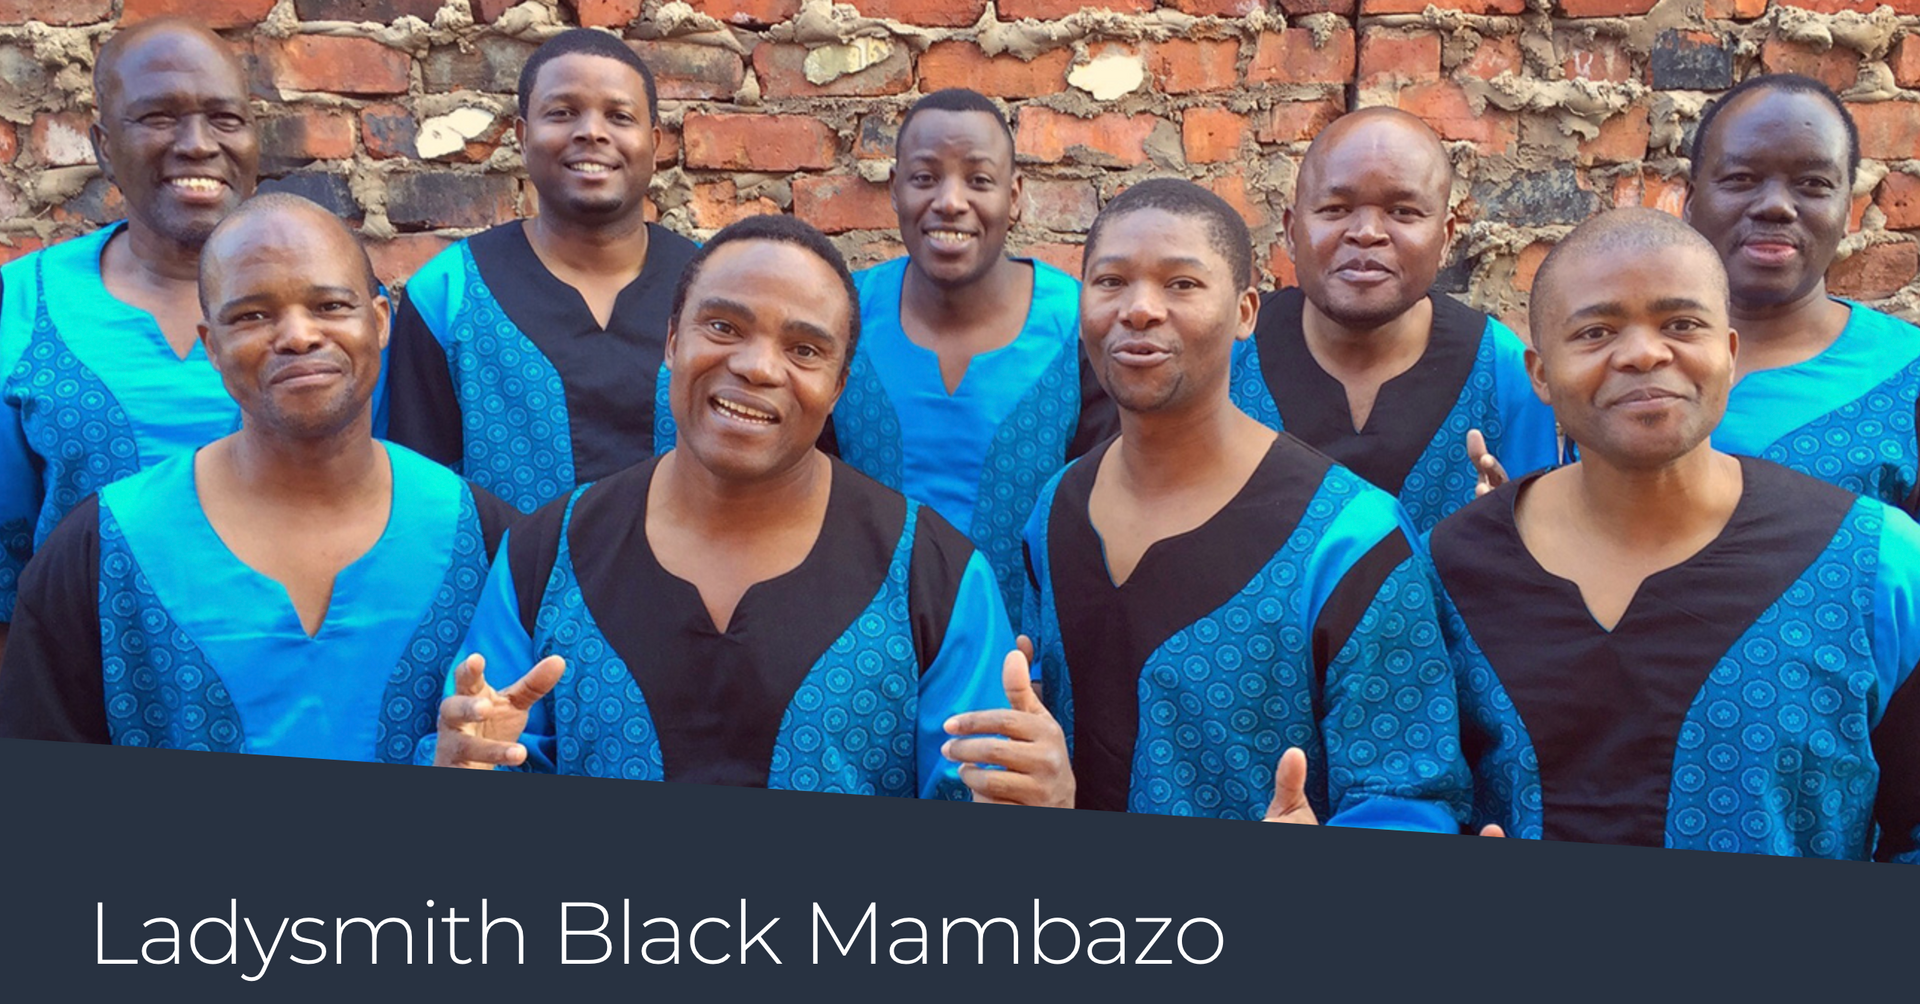 The group, Ladysmith Black Mambazo, will be coming to Gainesville, FL on February 27, 2024.